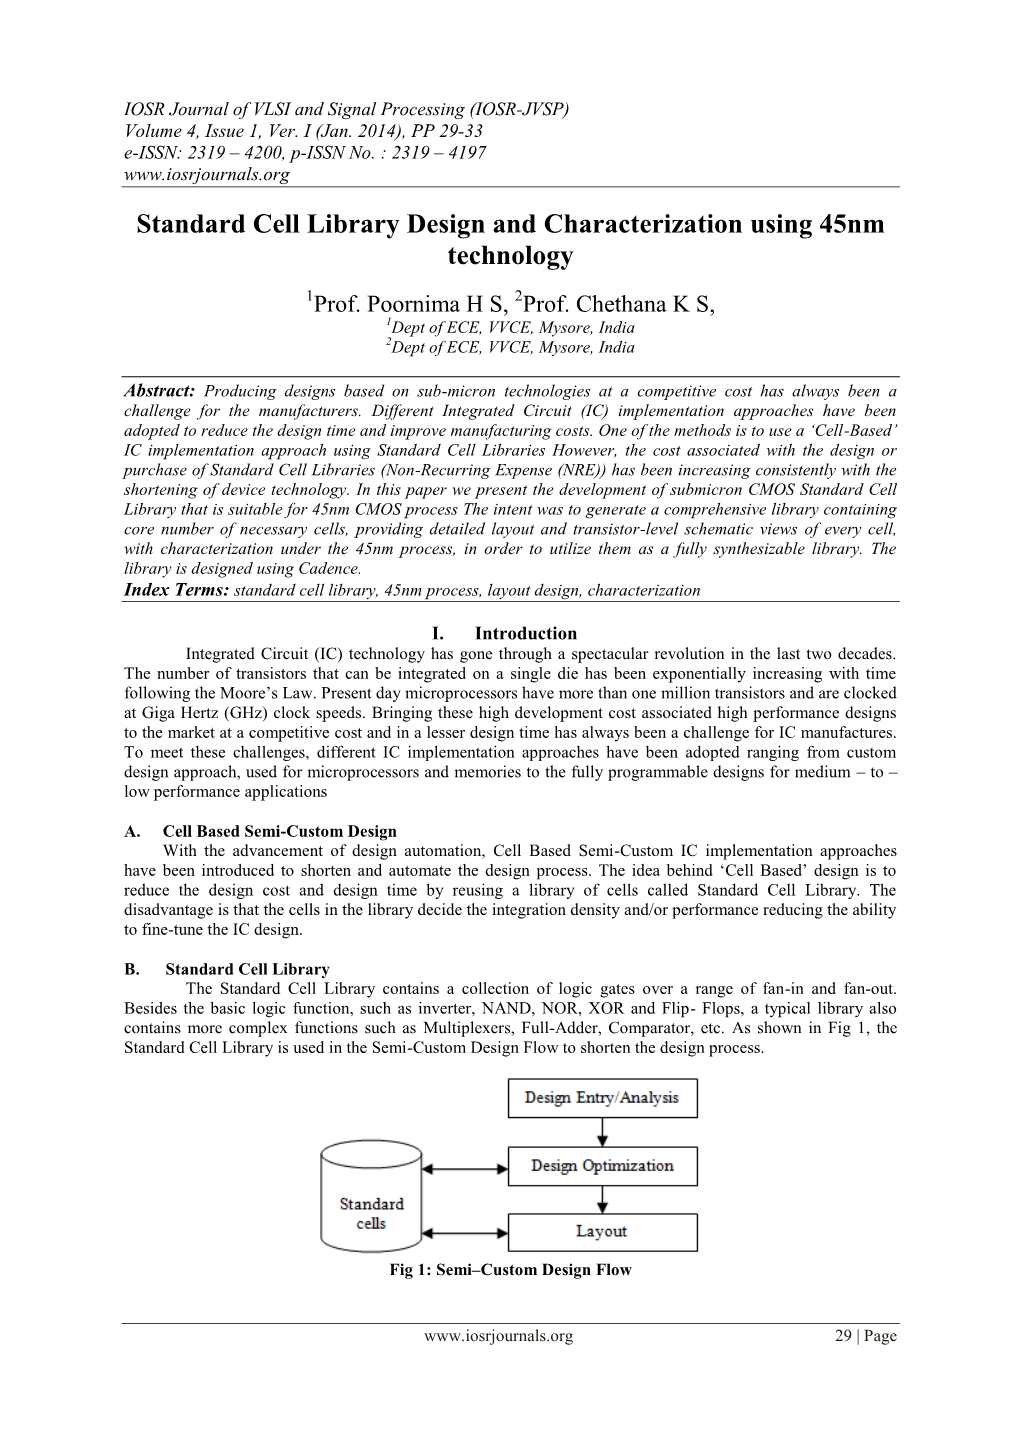 Standard Cell Library Design and Characterization Using 45Nm Technology